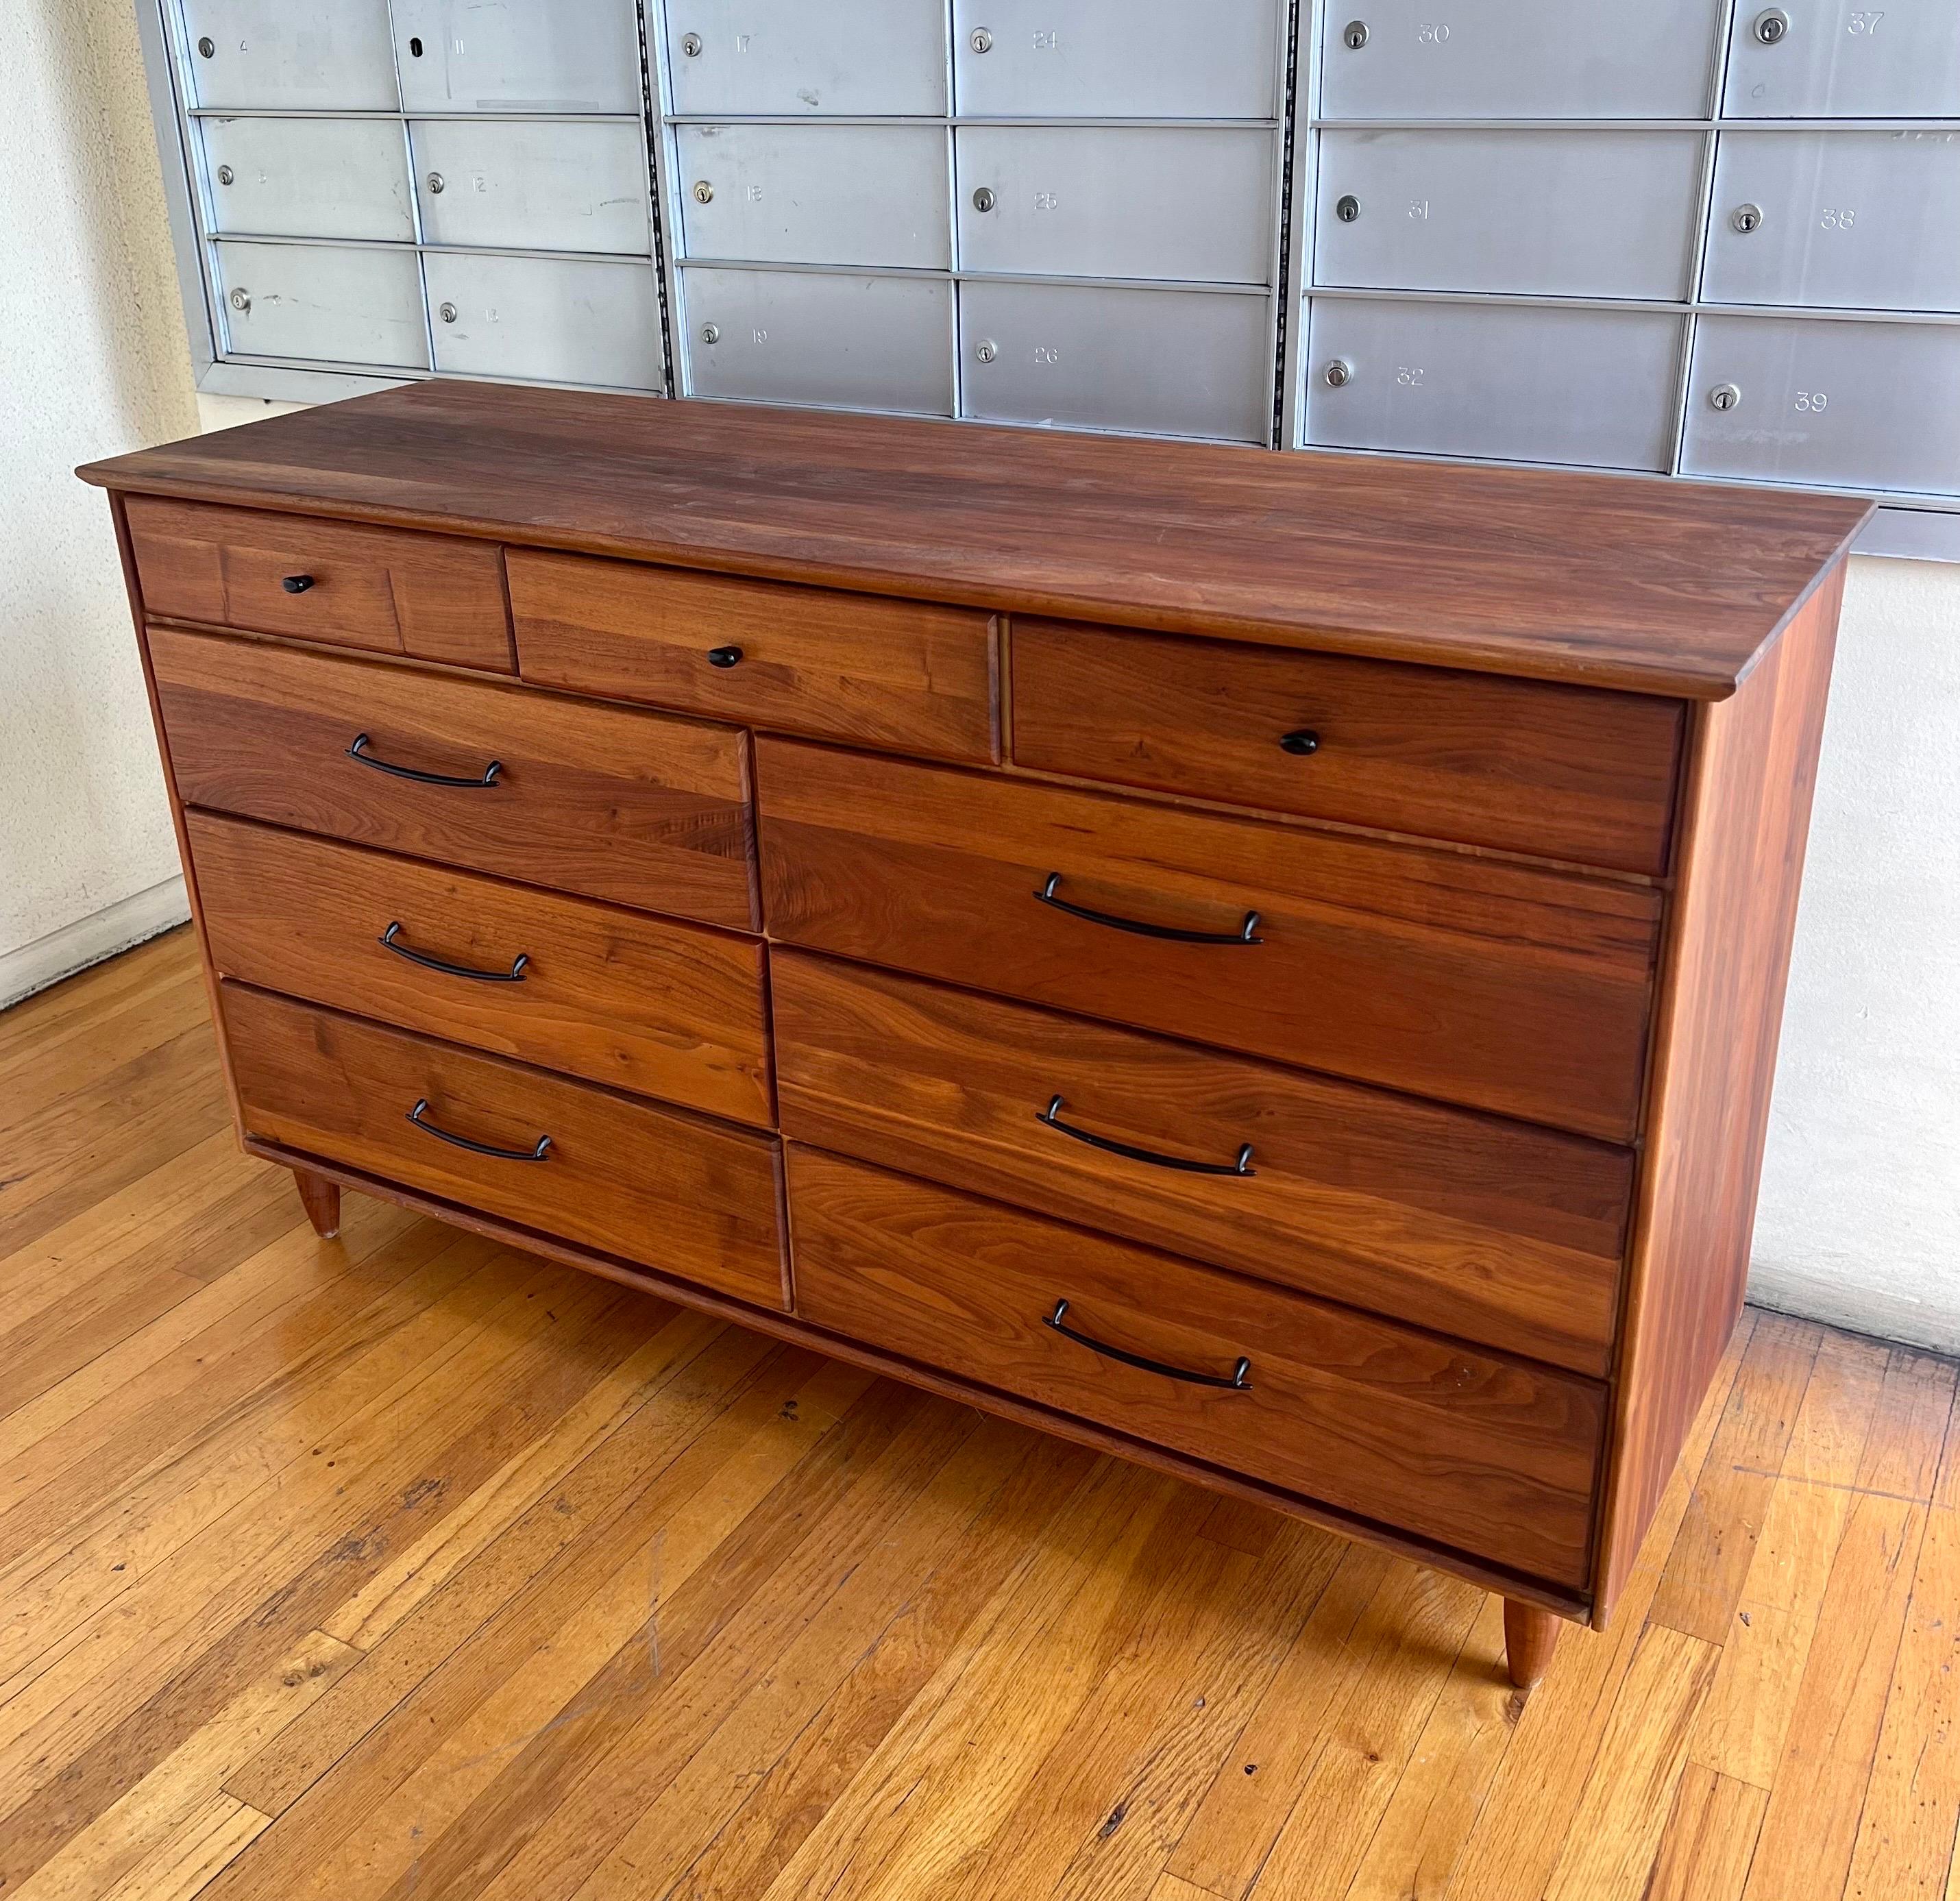 American solid walnut striking high-quality dresser is beautiful and unique. California design freshly refinished in great condition.